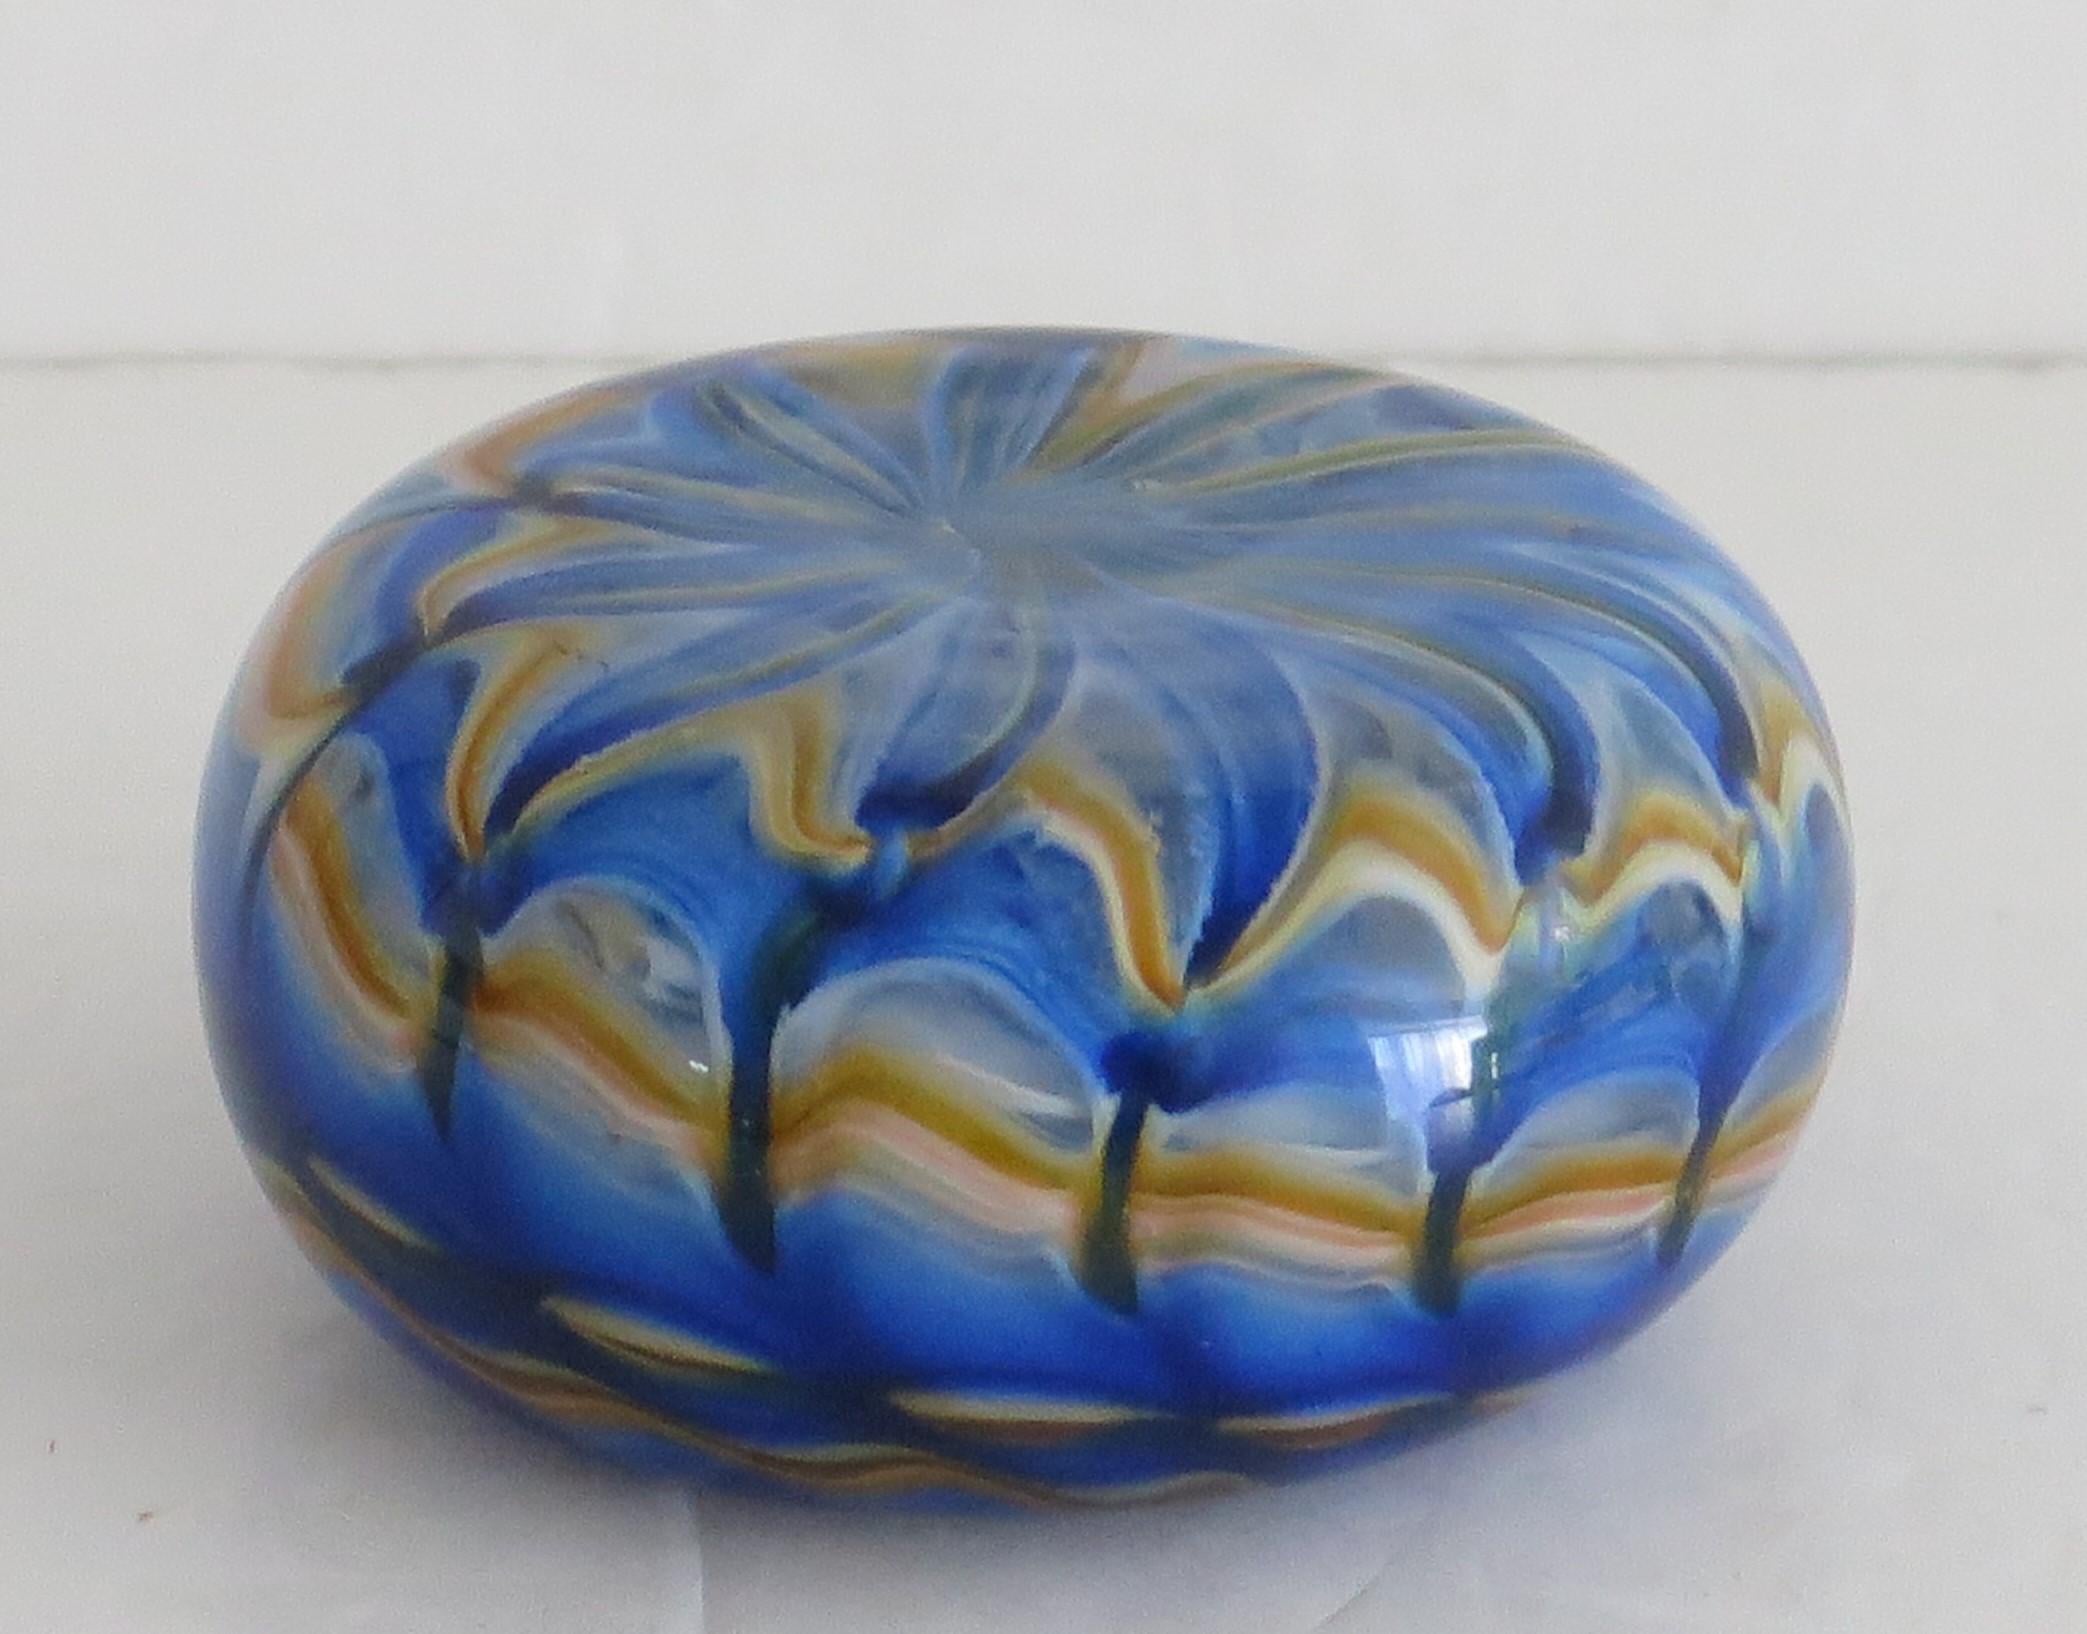 This is an unusual hand-made Art-Glass paperweight from Uredale Glass, Masham, North Yorkshire, England which we date to the late 20th century.

The paperweight is hand made in the shape of a pebble. This is an individual fused glass piece with a